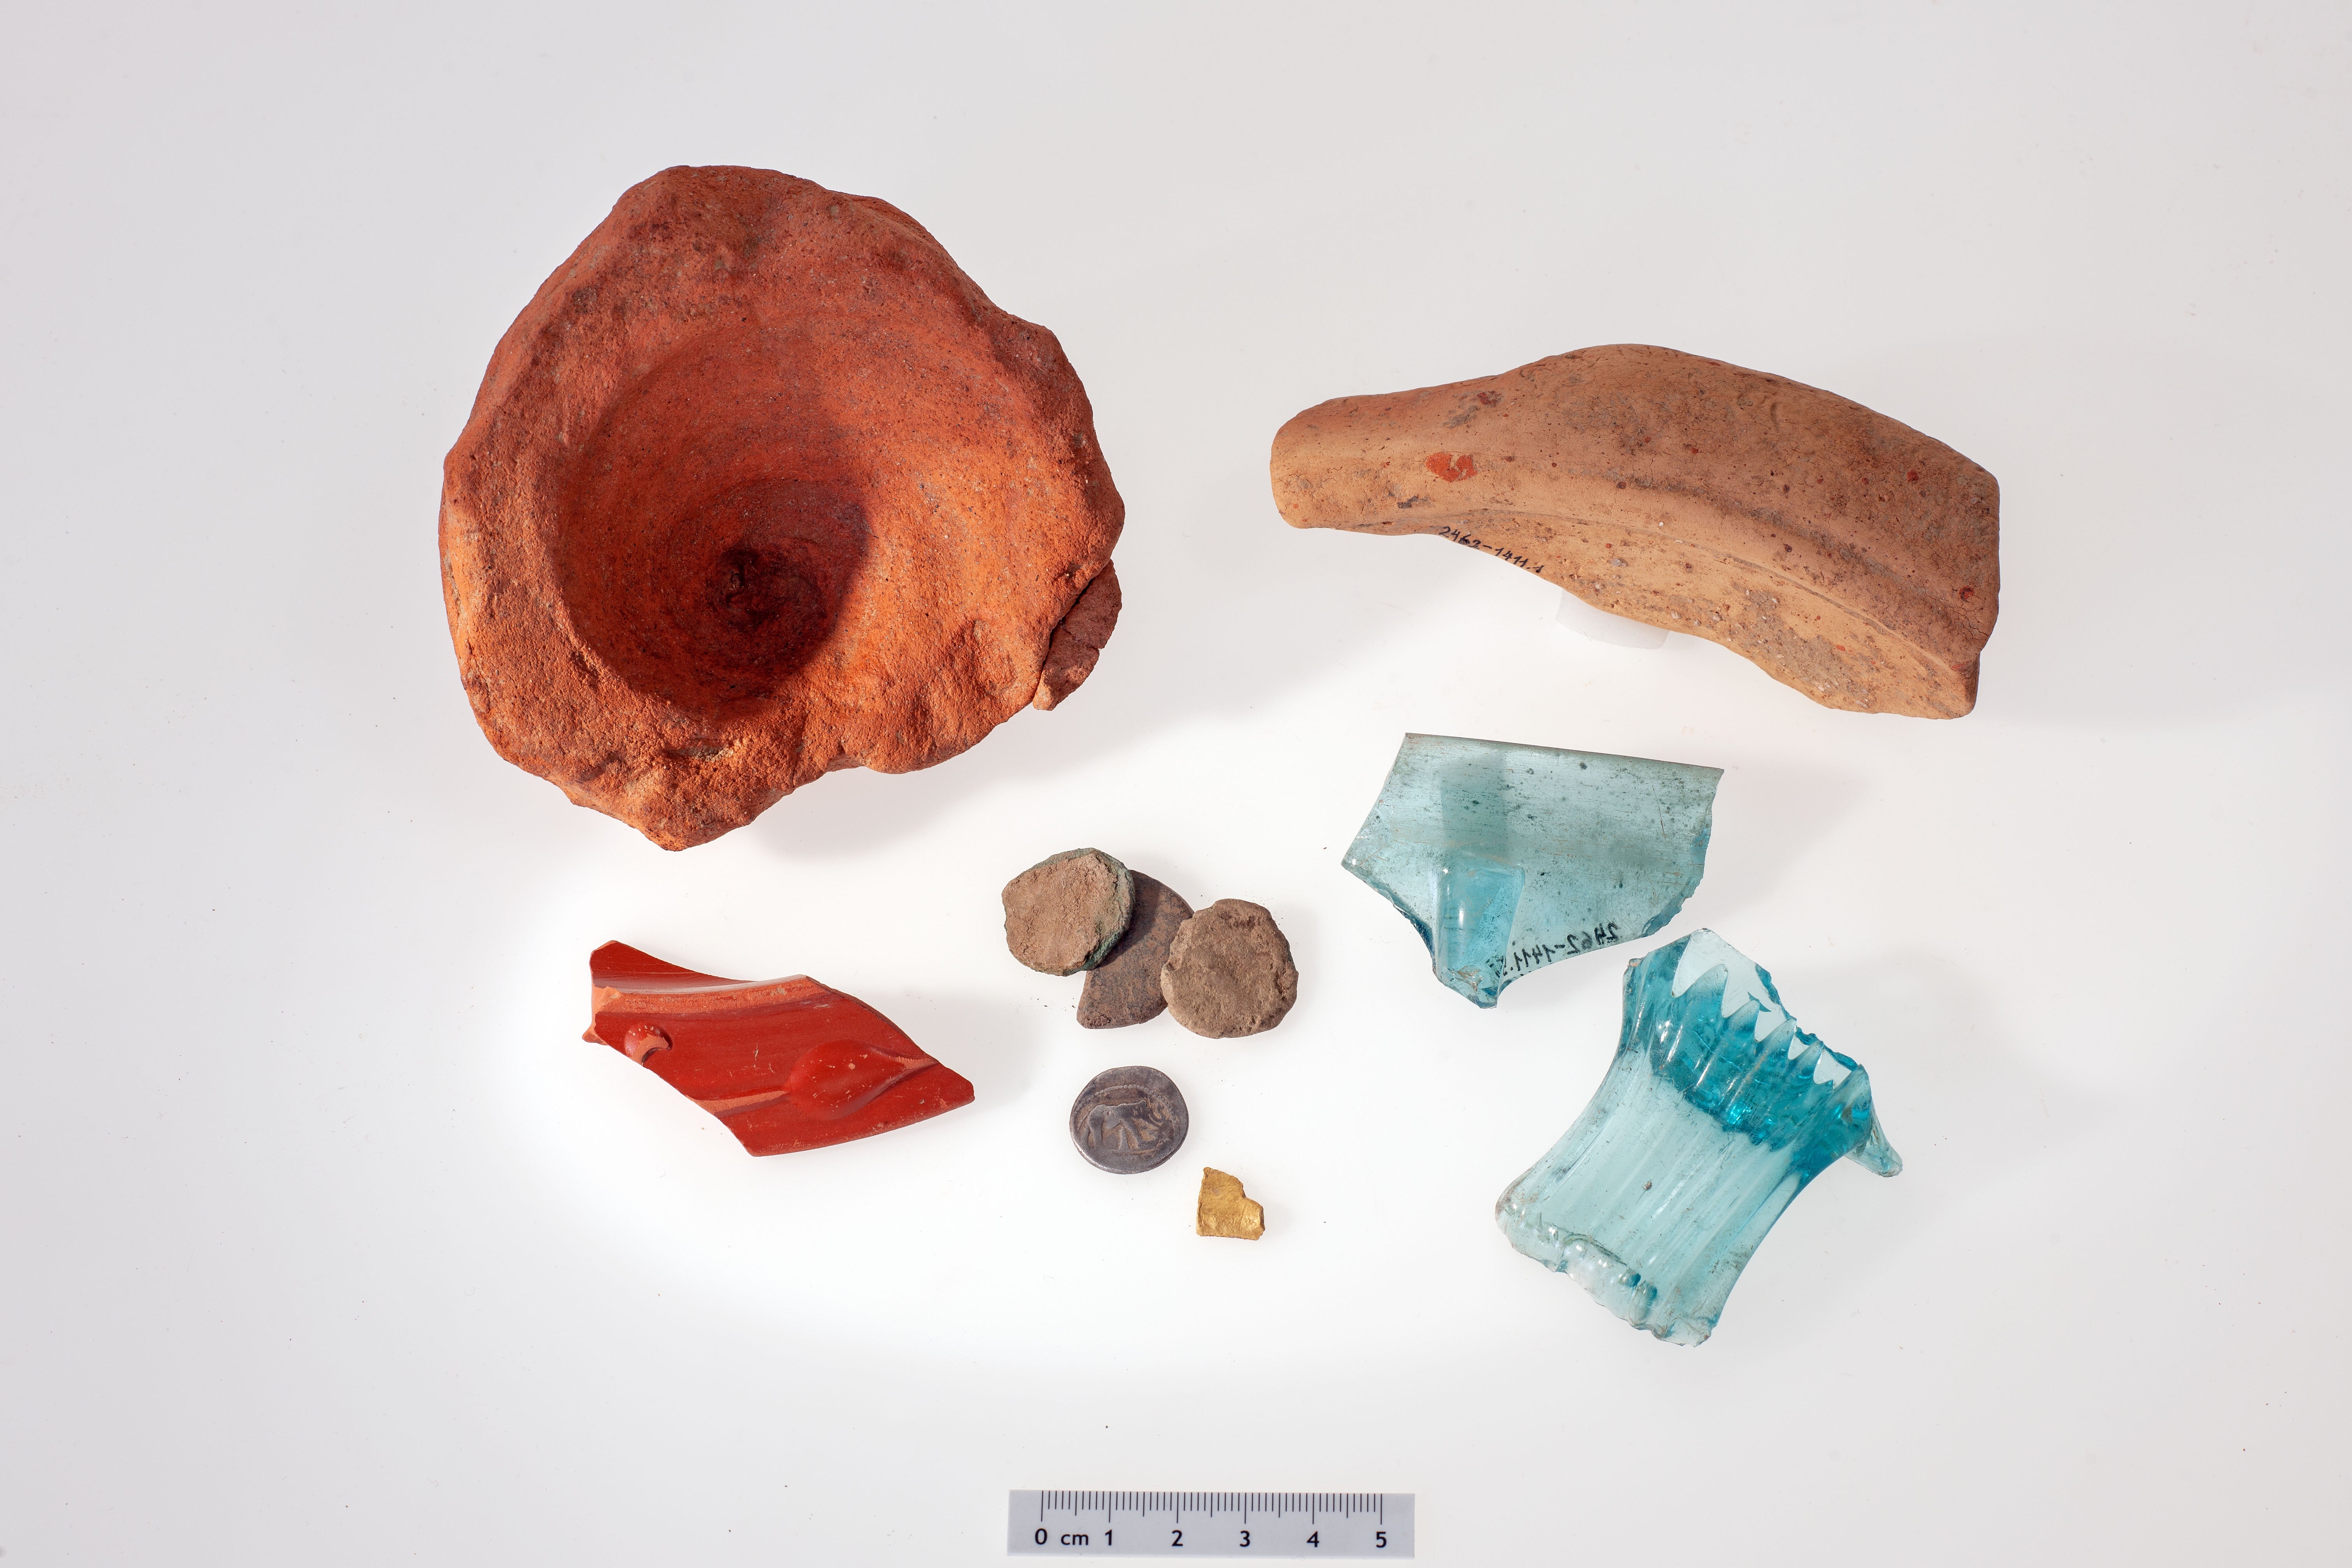 Small selection of Roman finds (from top left to bottom right): An amphora base, the shard of a rubbing bowl, the edge piece of a small bowl of Roman tableware with red coating (Terra Sigillata), four coins in found state, one of them made of silver by Julius Caesar, fragment of a gold object, pieces of a square bottle and a rib bowl made of blue glass